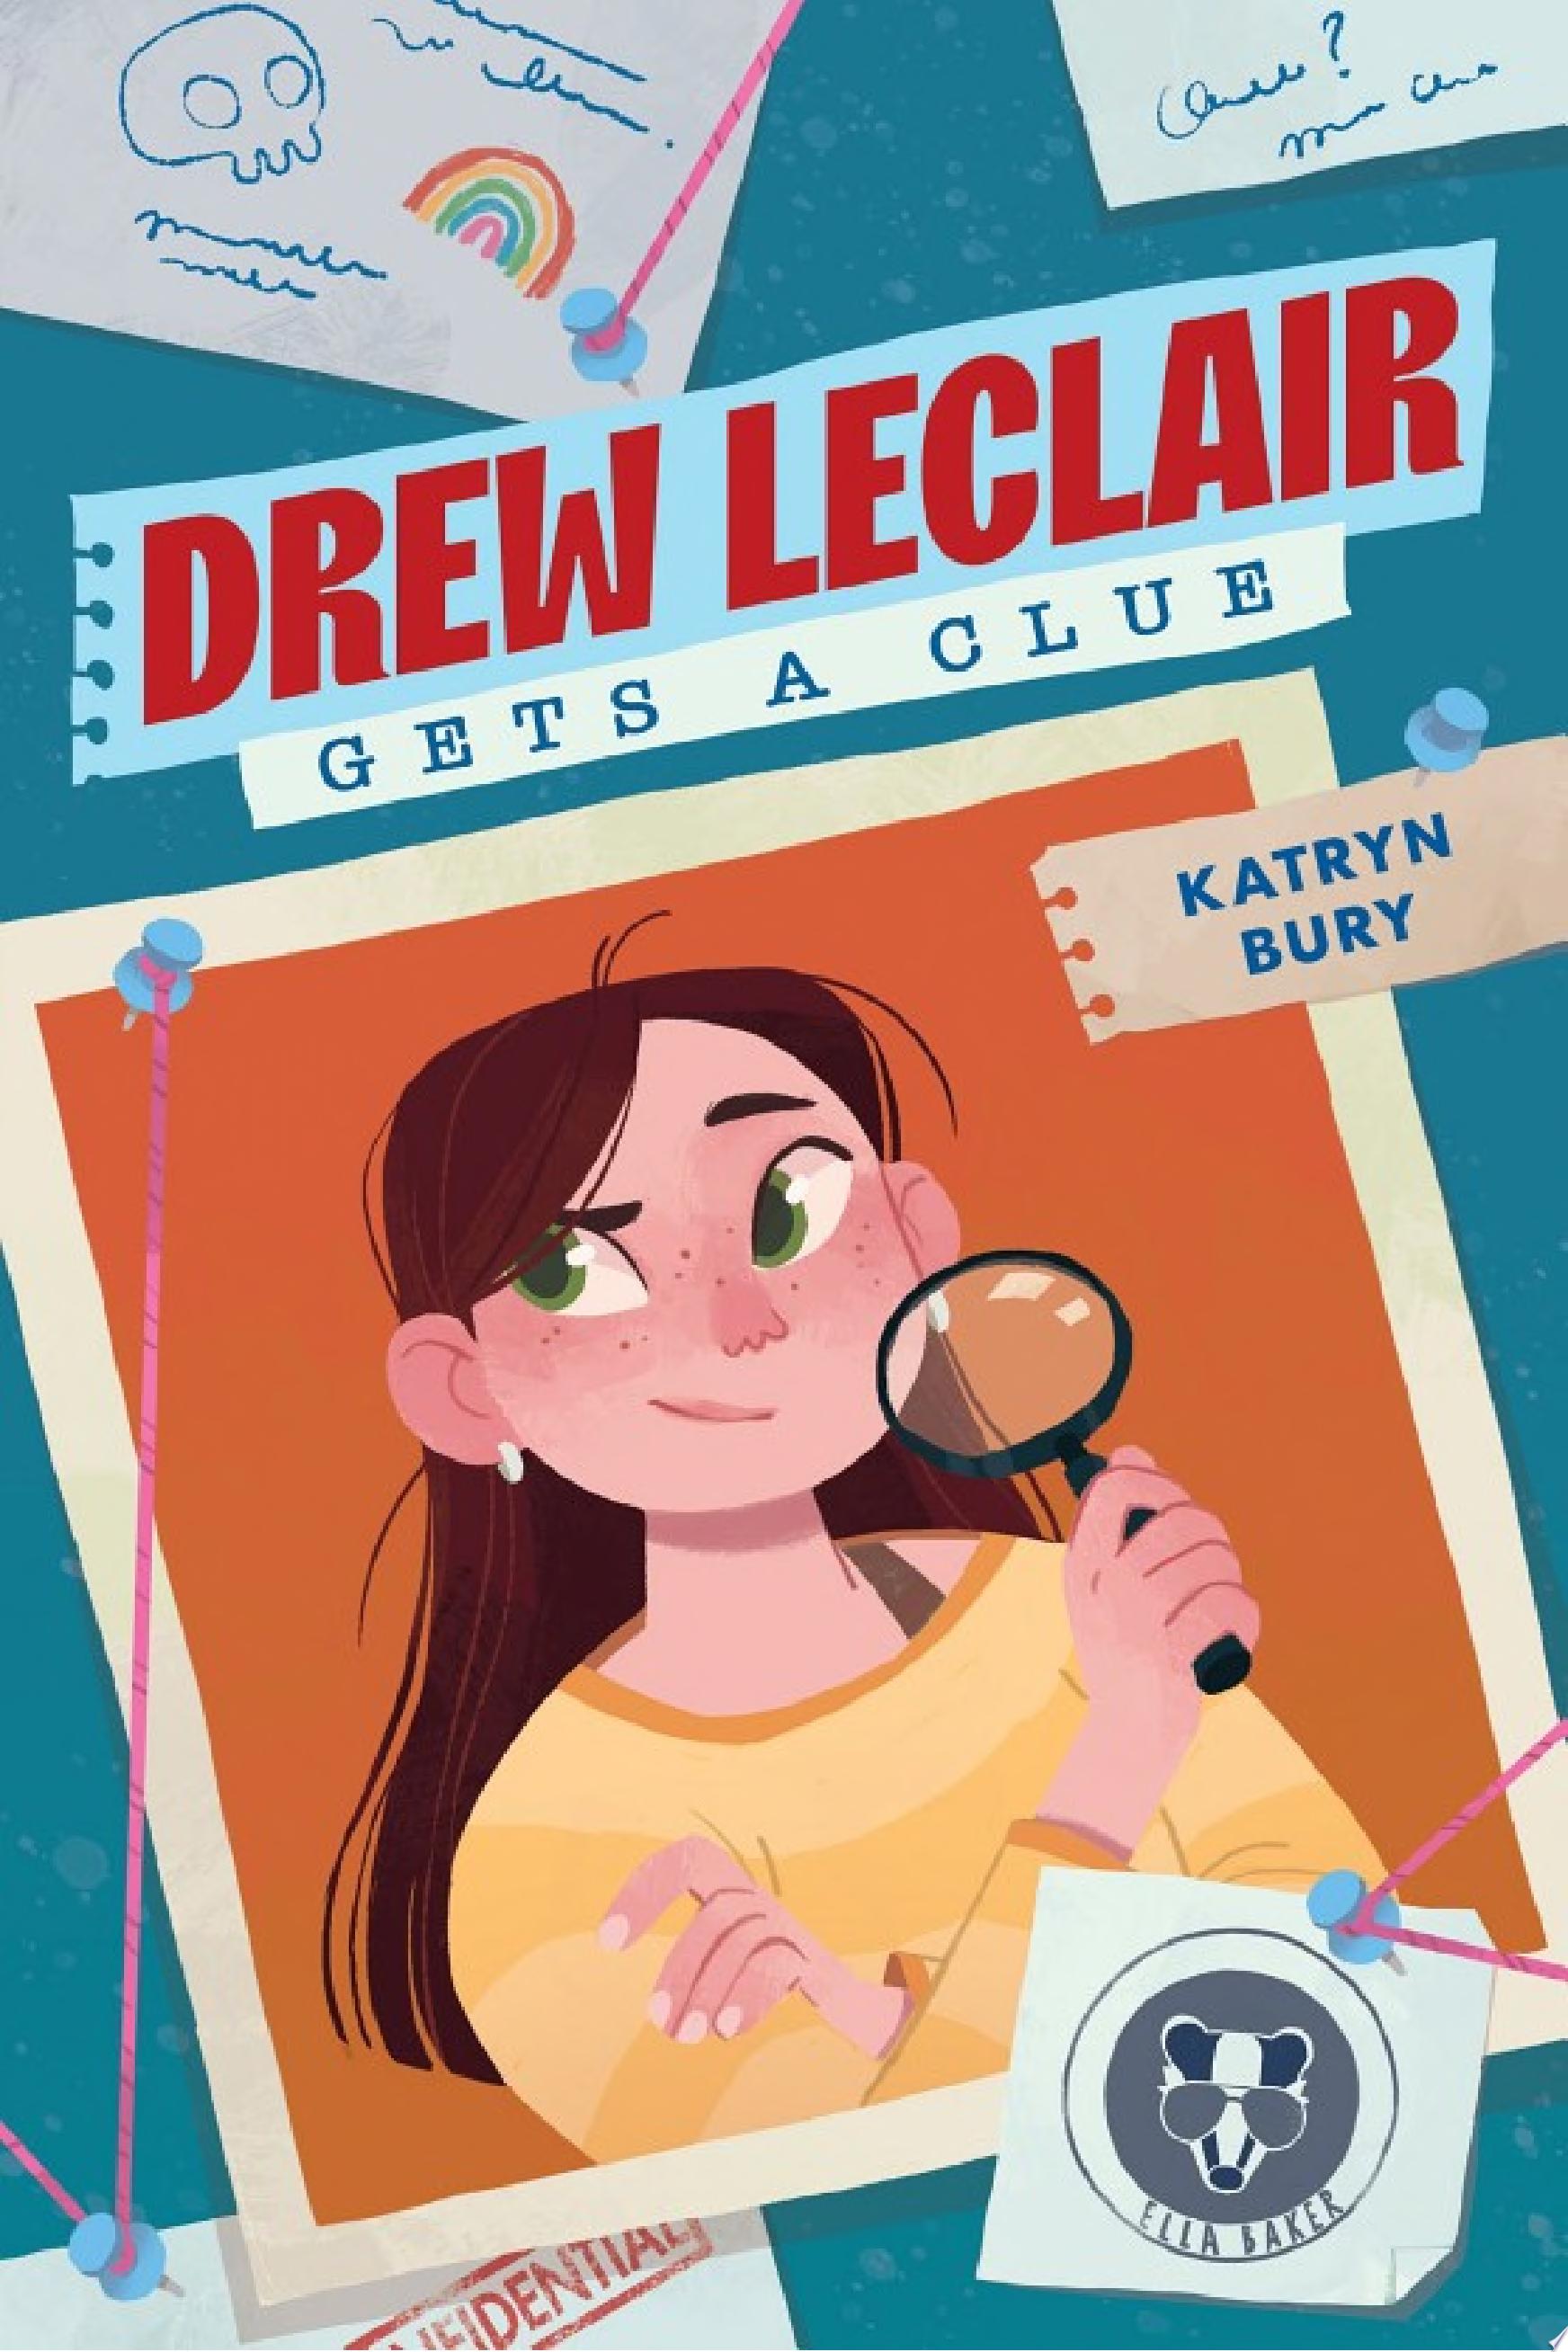 Image for "Drew Leclair Gets a Clue"